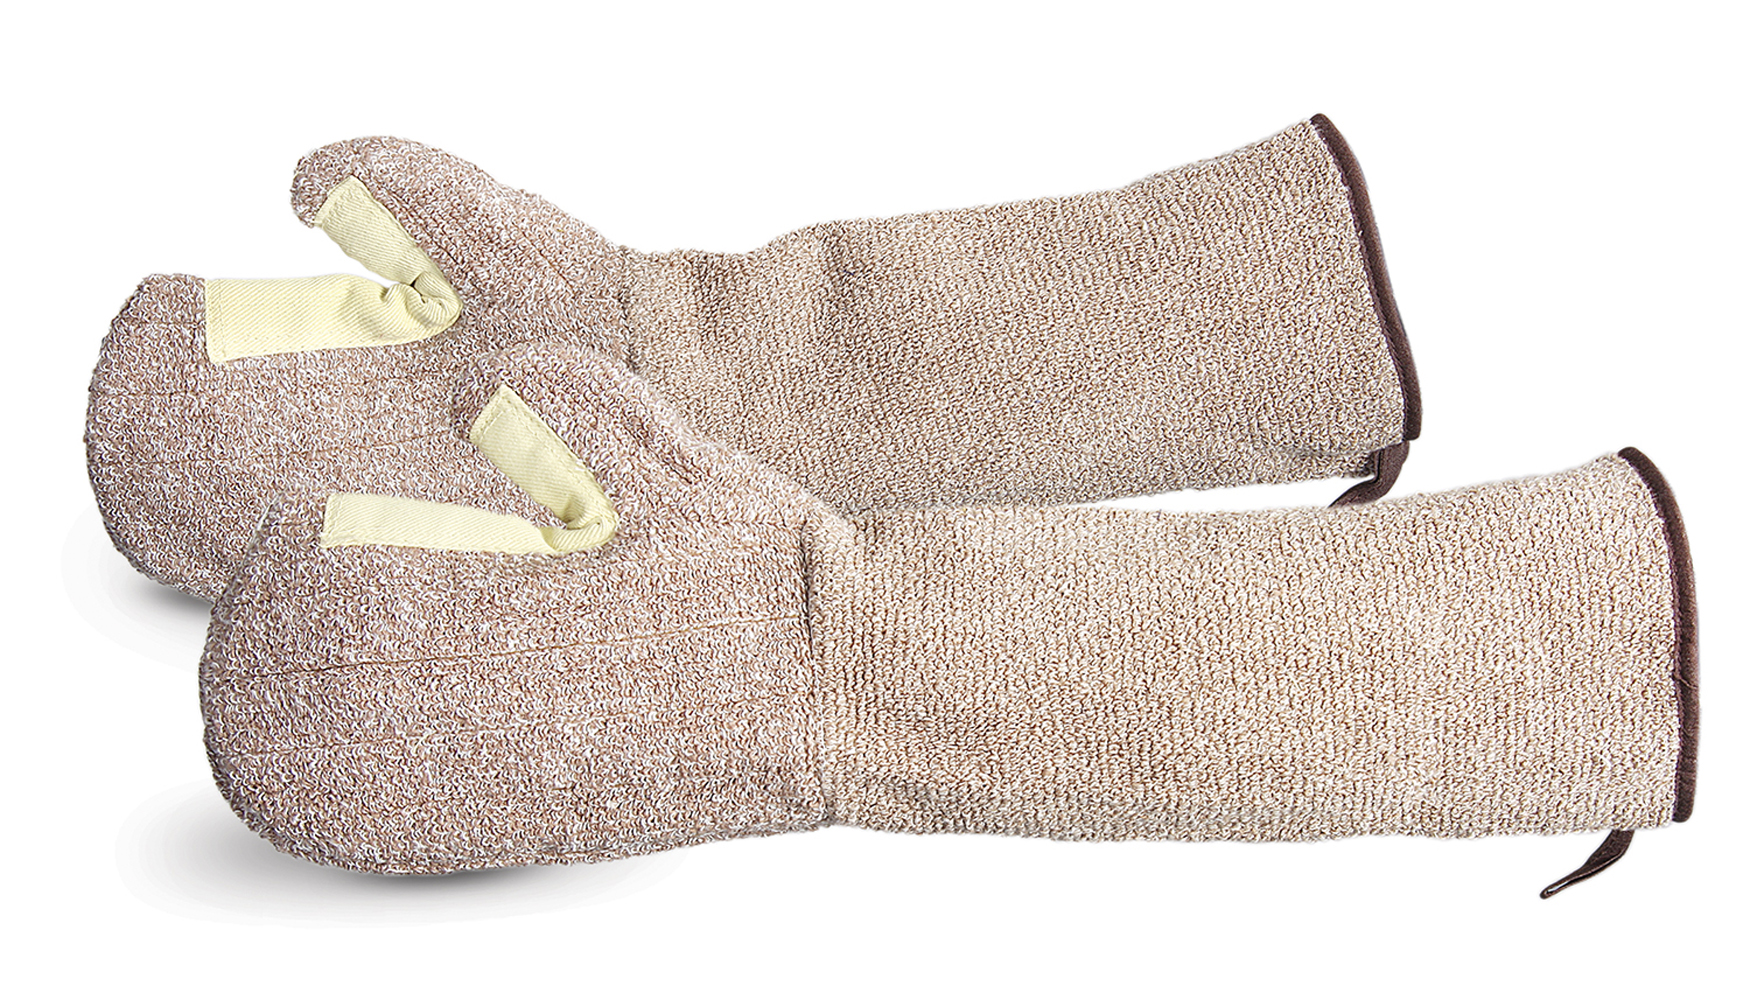 Terry Cloth Industrial Bakers Mitts, Heat Resistant Gauntlet Bakers Mitts, Extended Oven Mitts